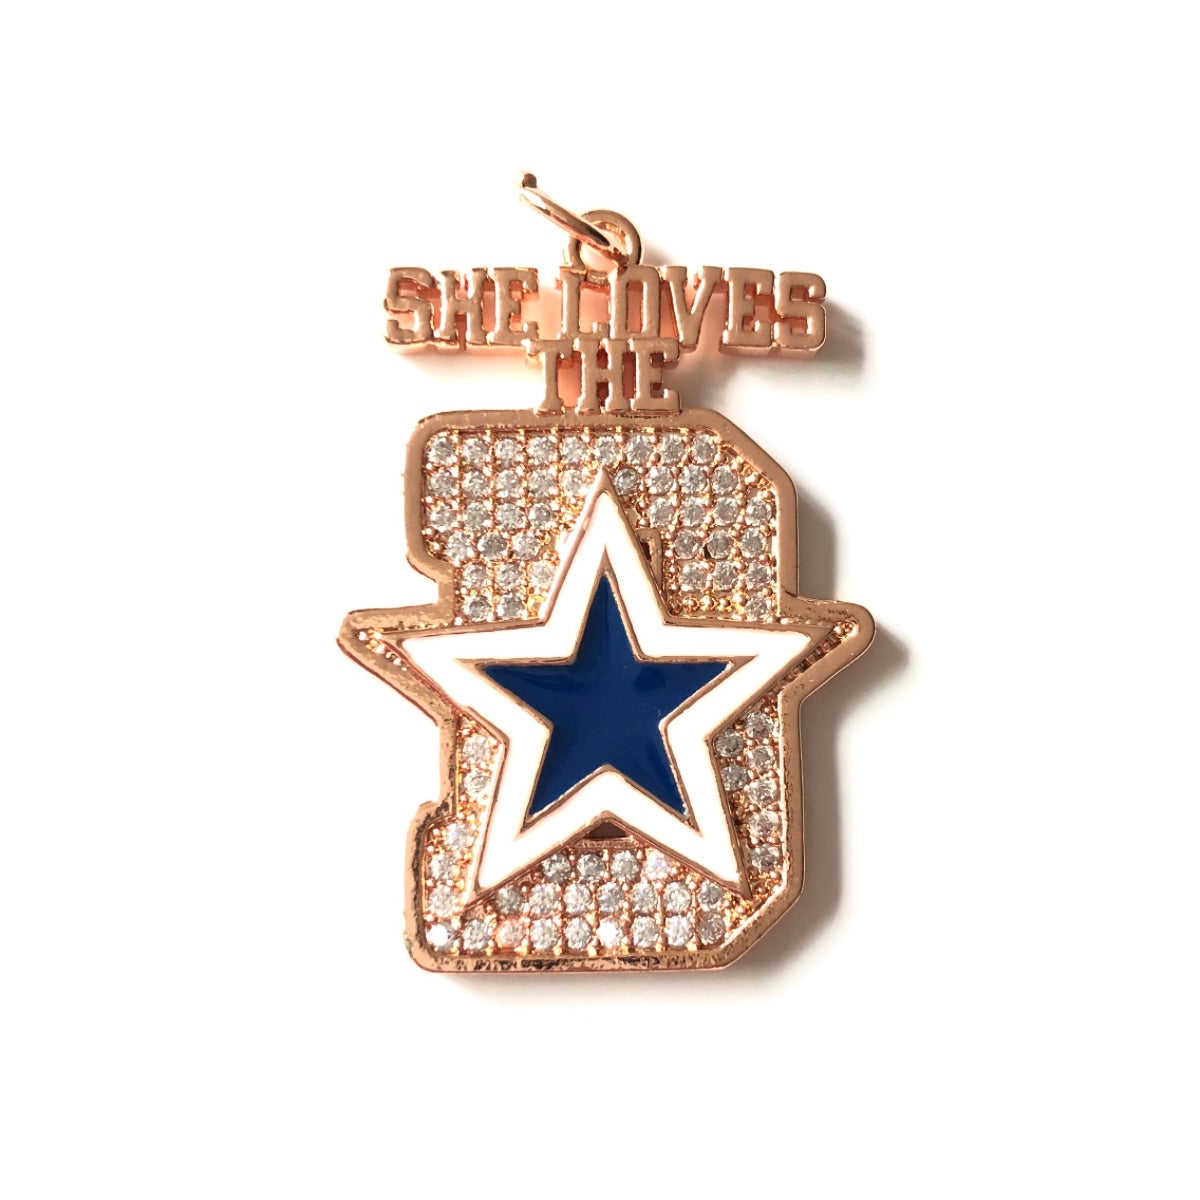 10pcs/lot 35*25mm Cowboys Star CZ Paved She Loves The D Word Charms Rose Gold CZ Paved Charms American Football Sports New Charms Arrivals Charms Beads Beyond